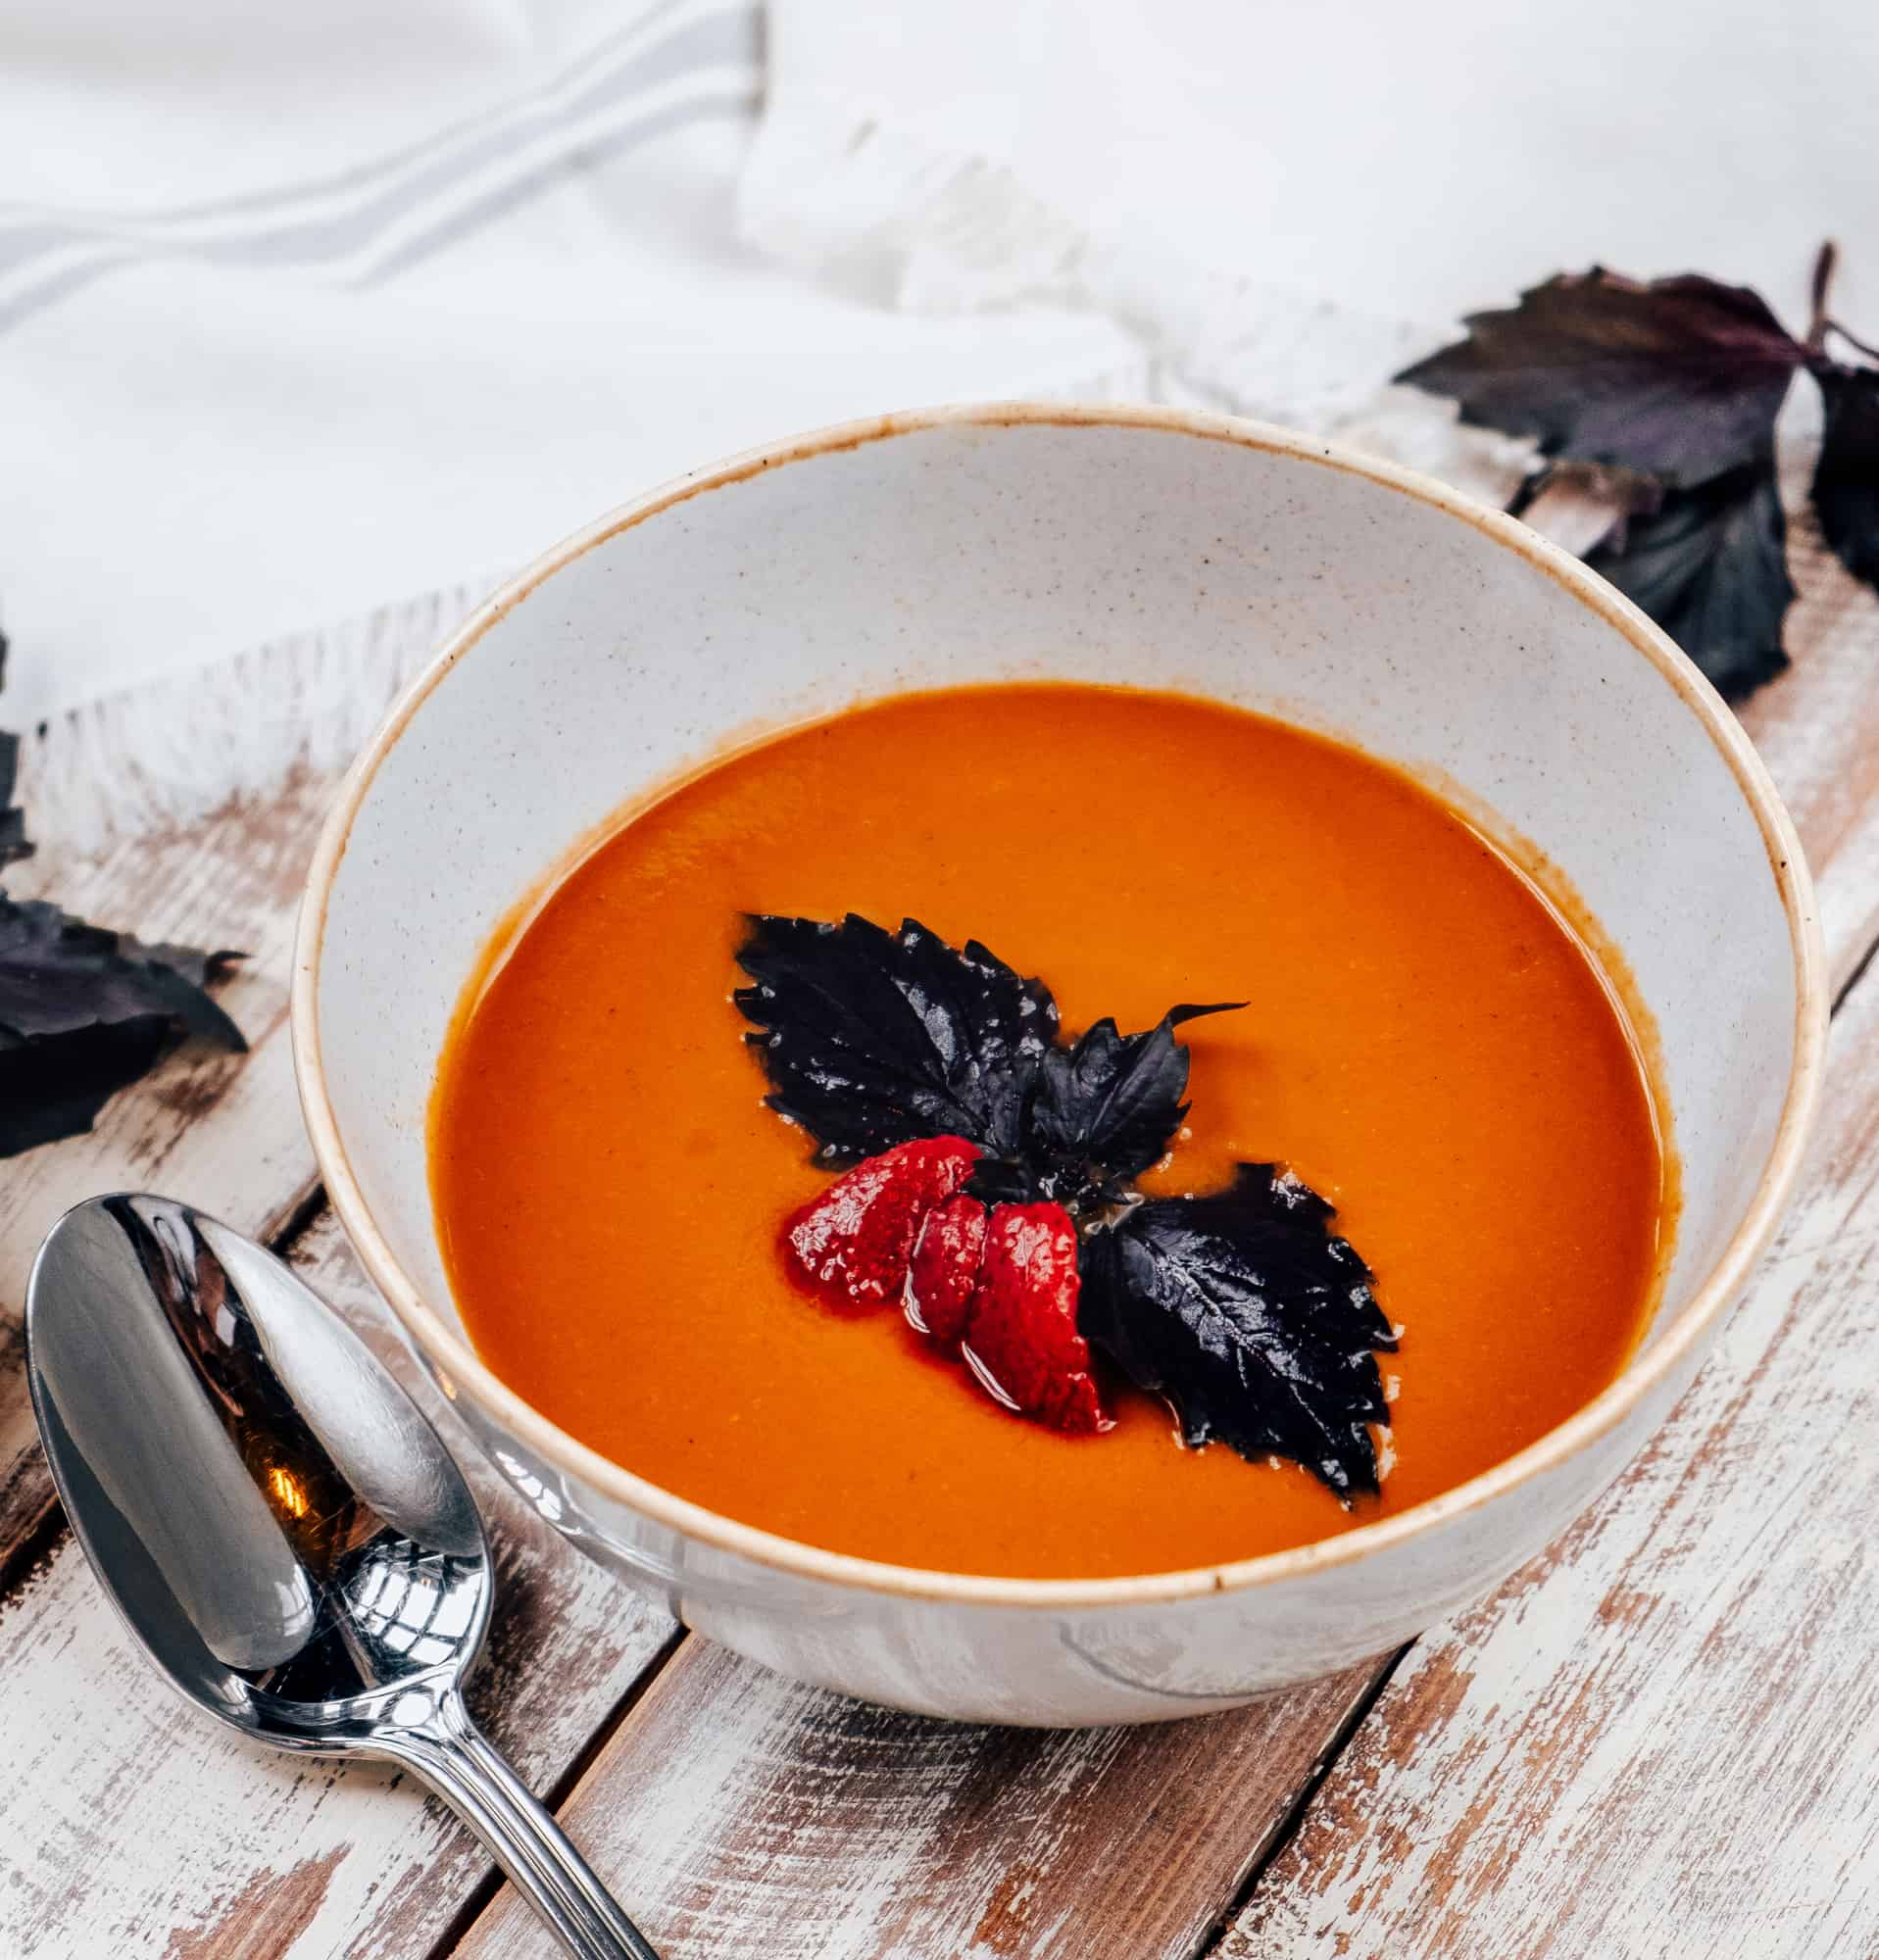 Tomato soup garnished with purple basil in a white bowl on a wooden table with a spoon at the side.